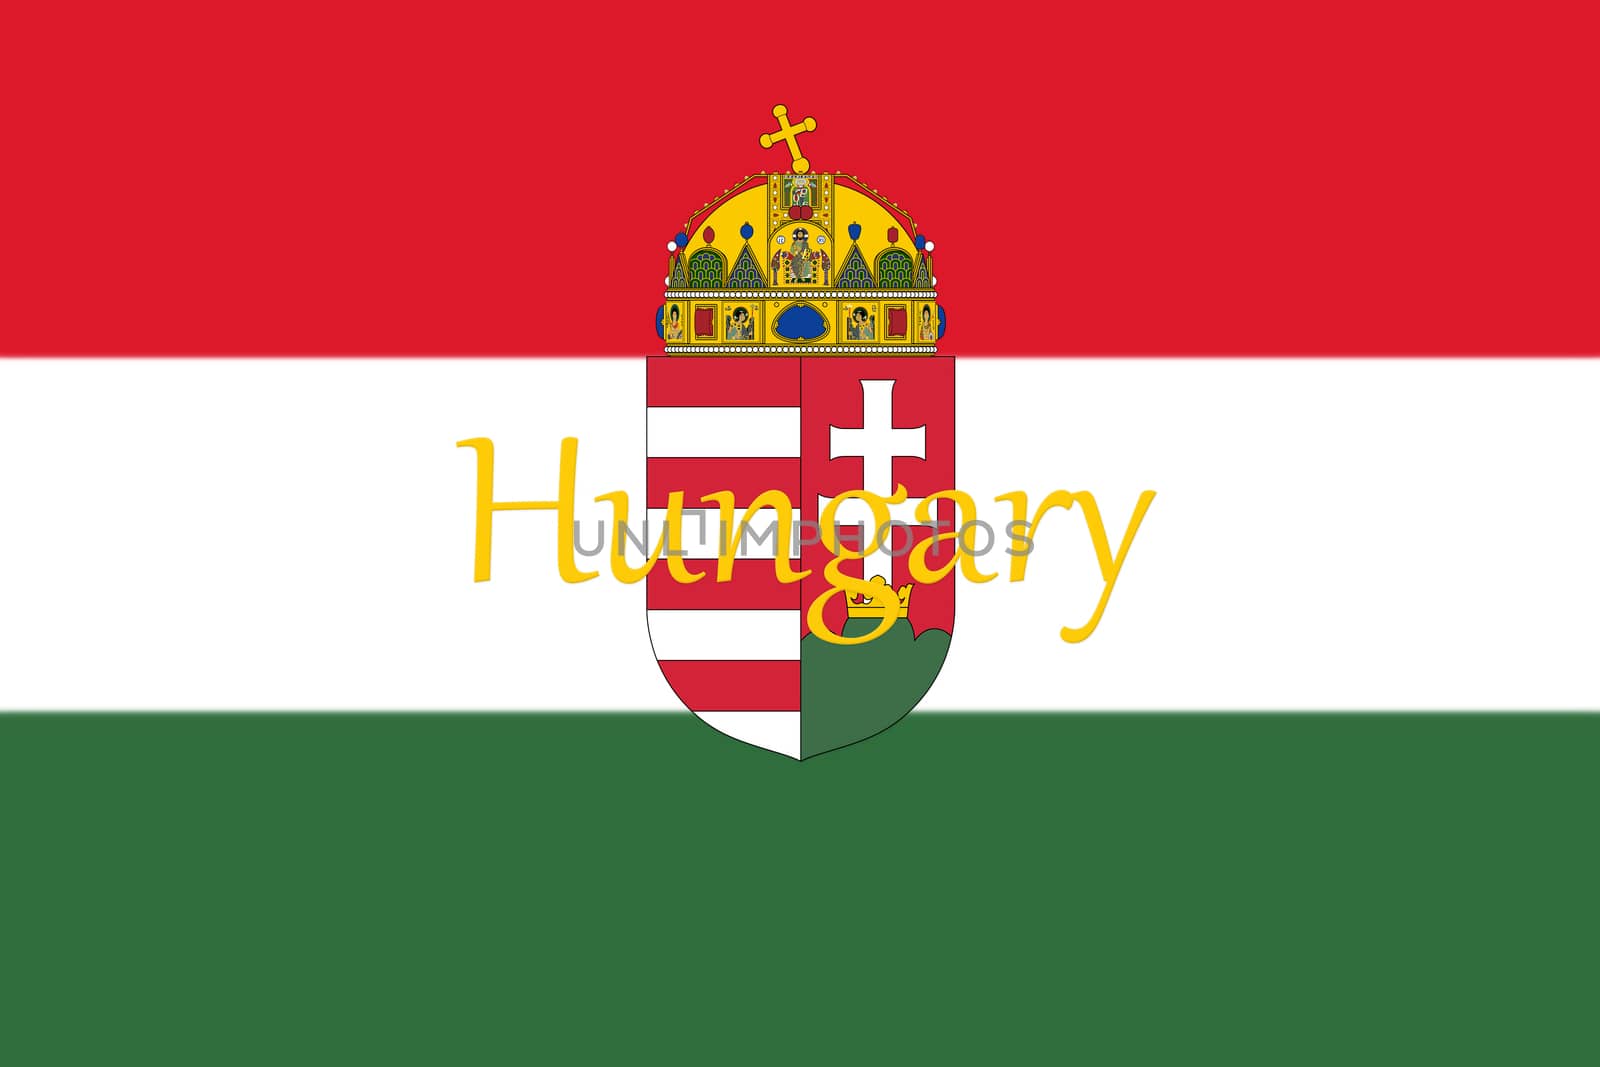 Hungarian National Flag With Coat Of Arms and Hungary Written On It 3D illustration 